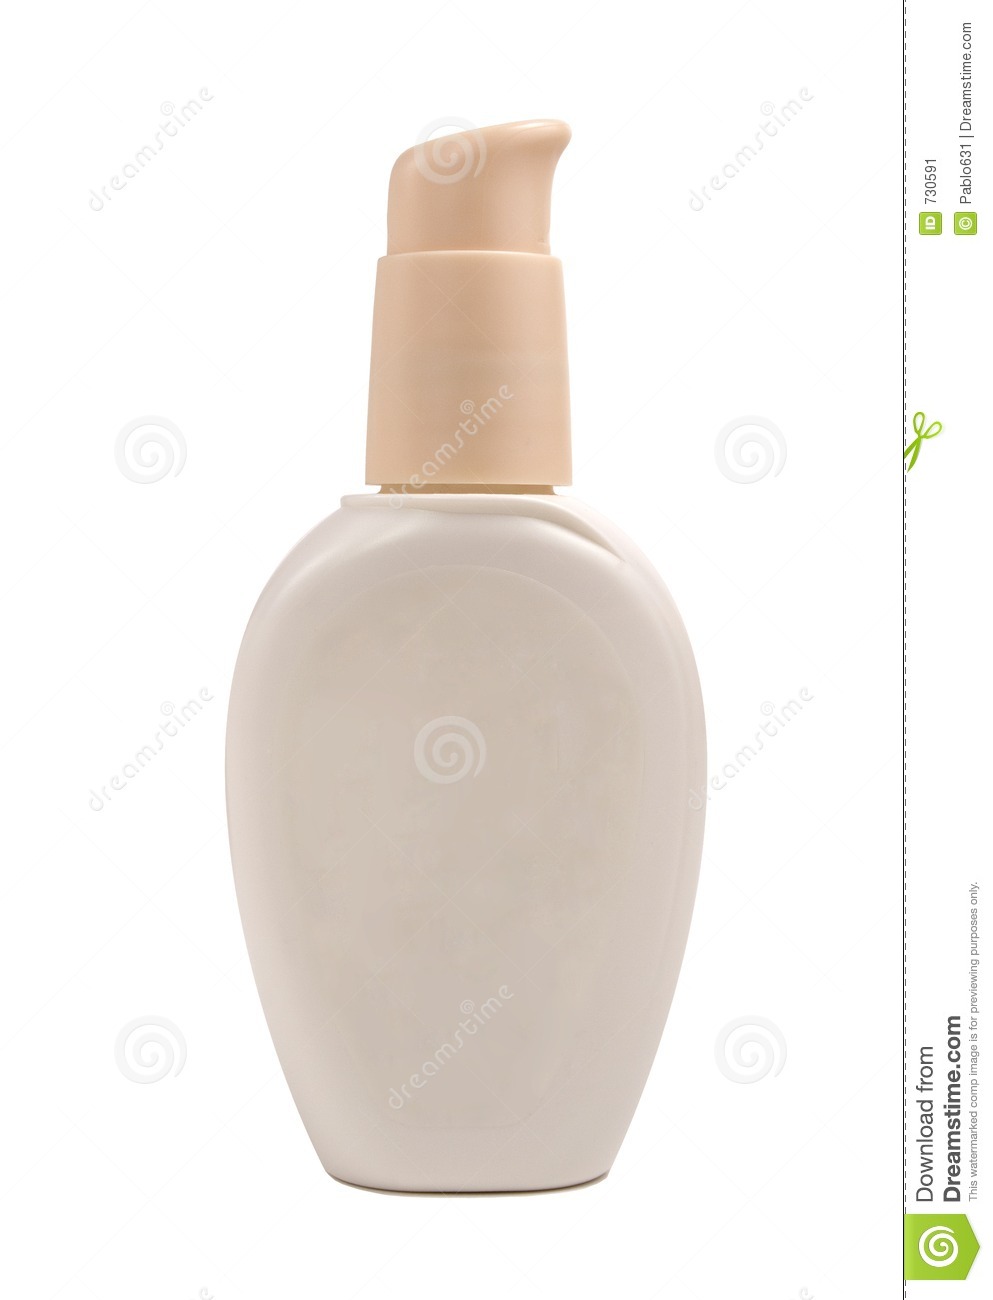 Putting On Lotion Clipart Lotion Bottle